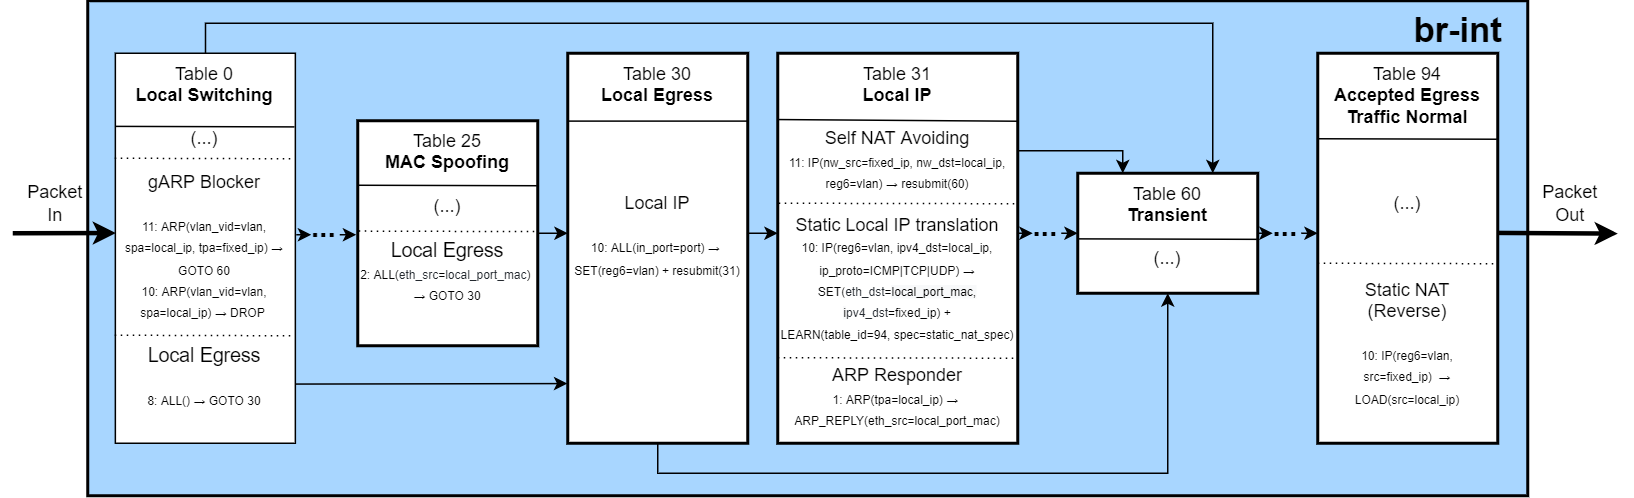 Local IP implementation inside 